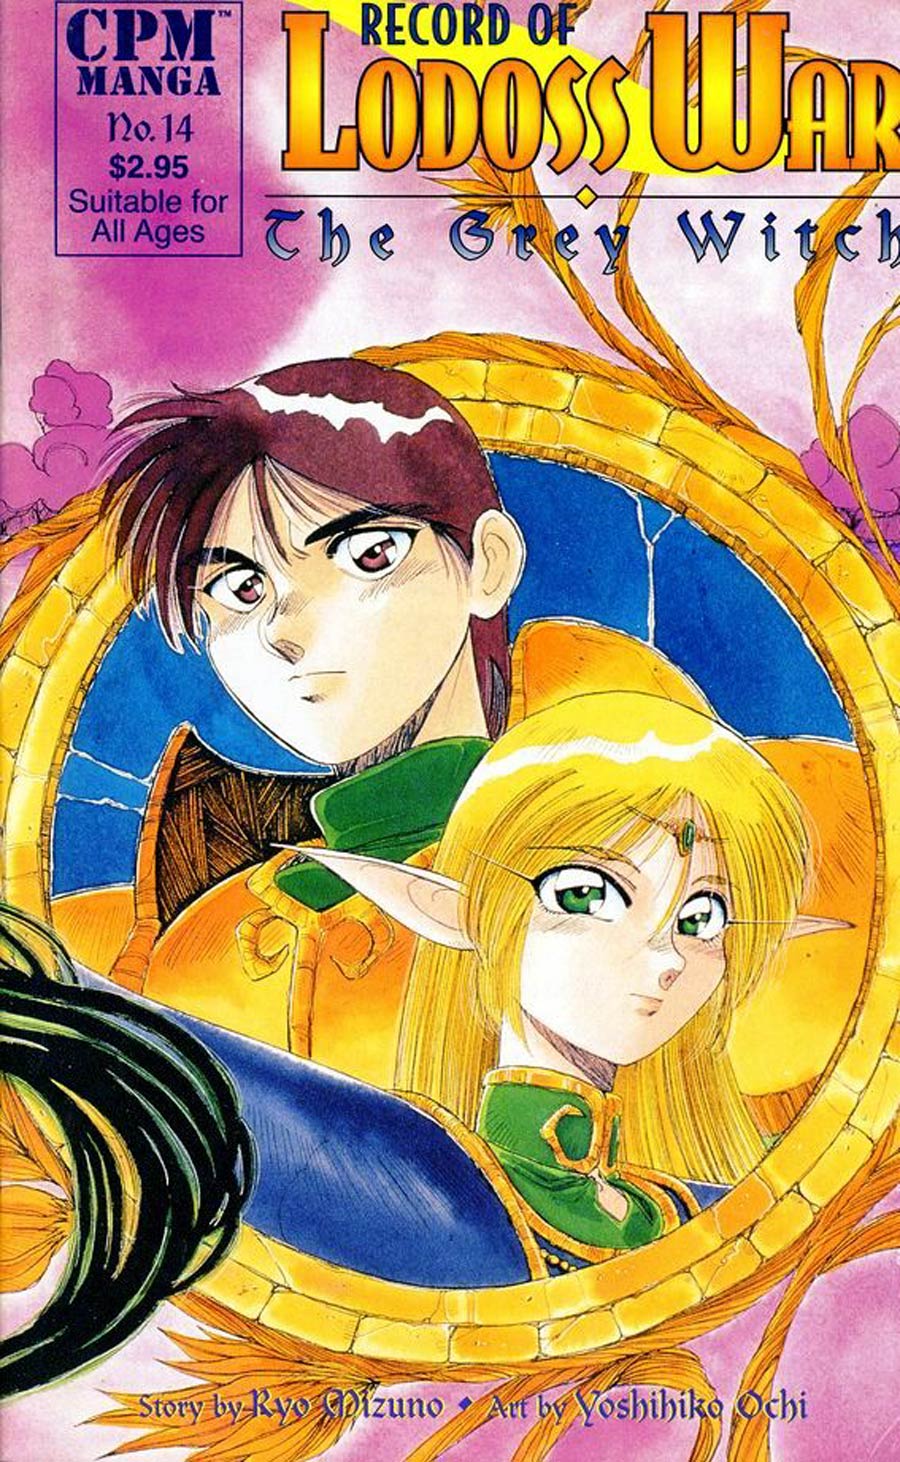 Record Of Lodoss War The Grey Witch #14